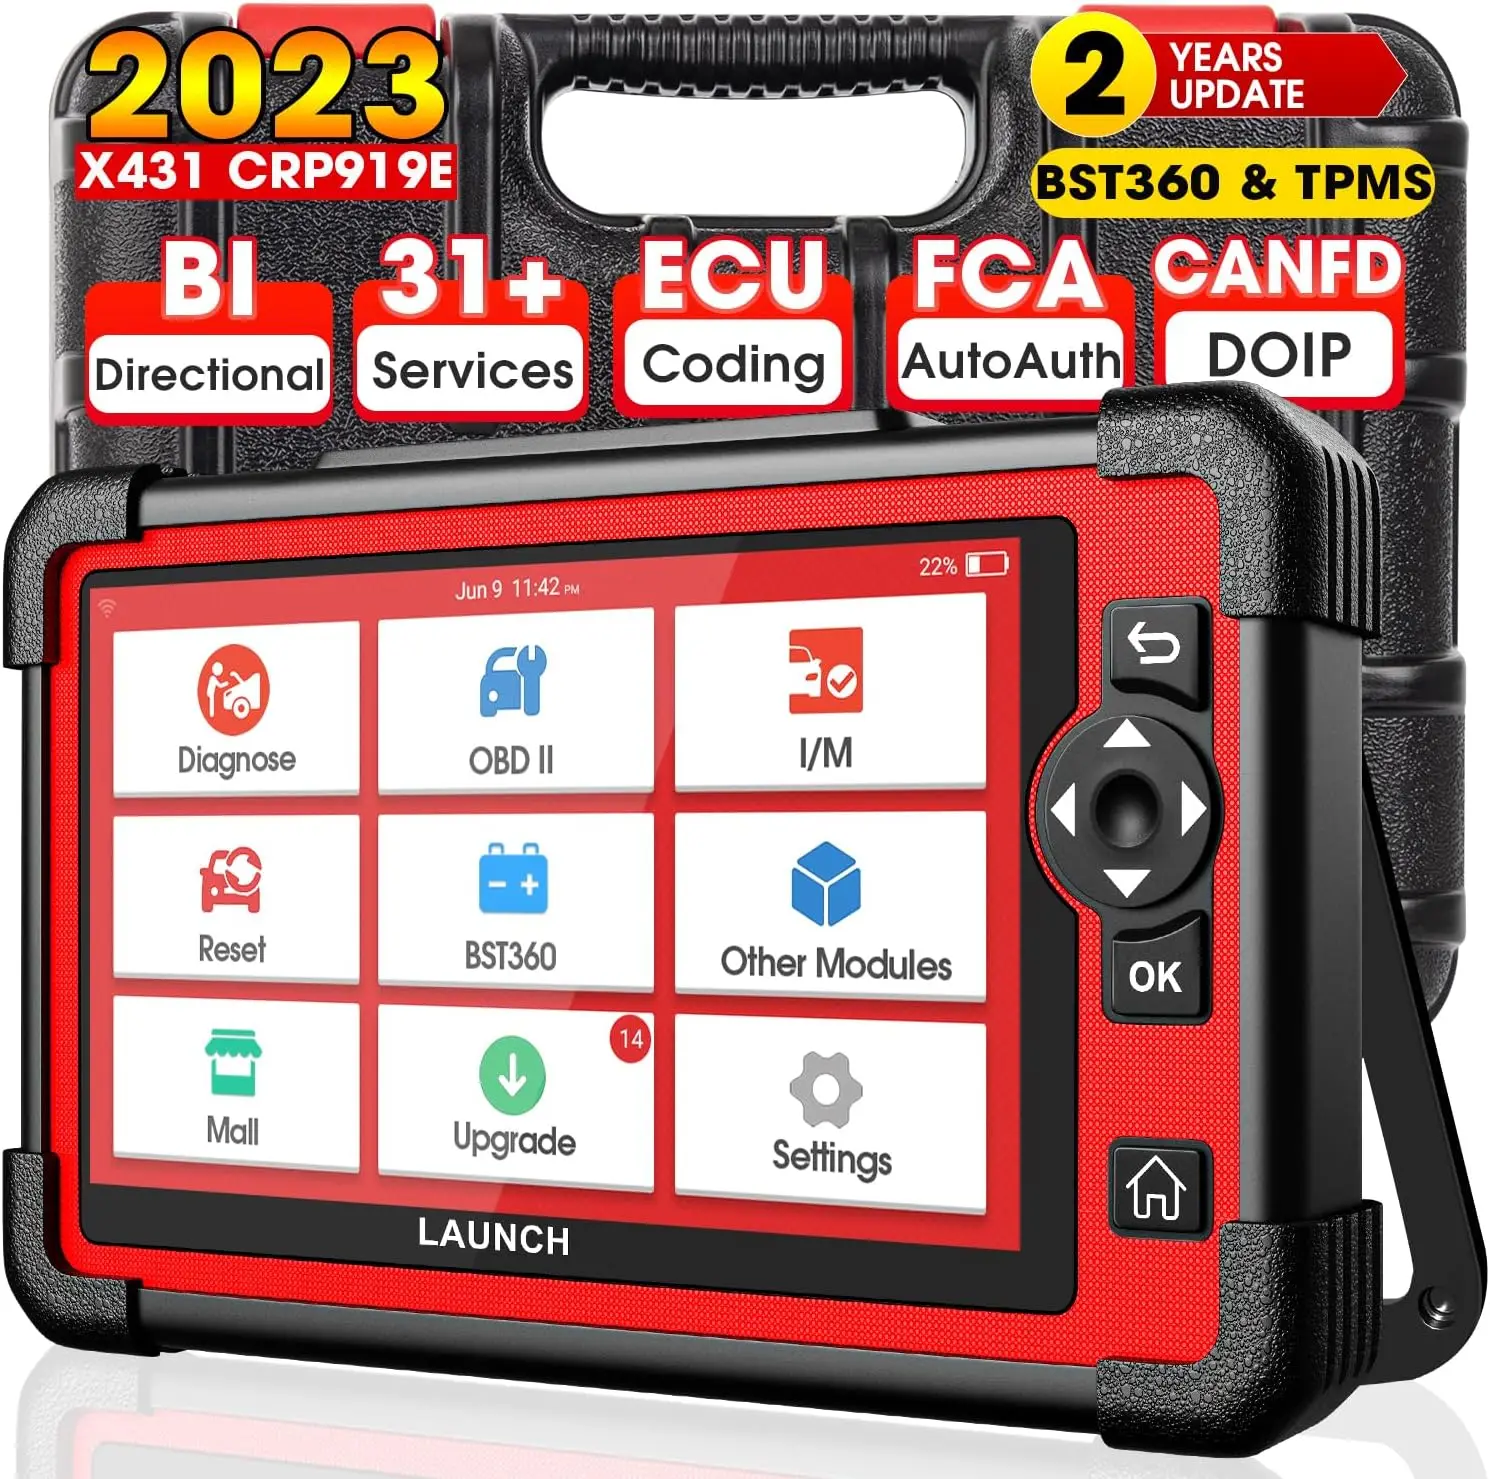 

Launch CRP 919E Full System CANFD Bi-directional Control BST 360 TPMS ECU Coding Diagnostic Tool Machine with 31 Resets